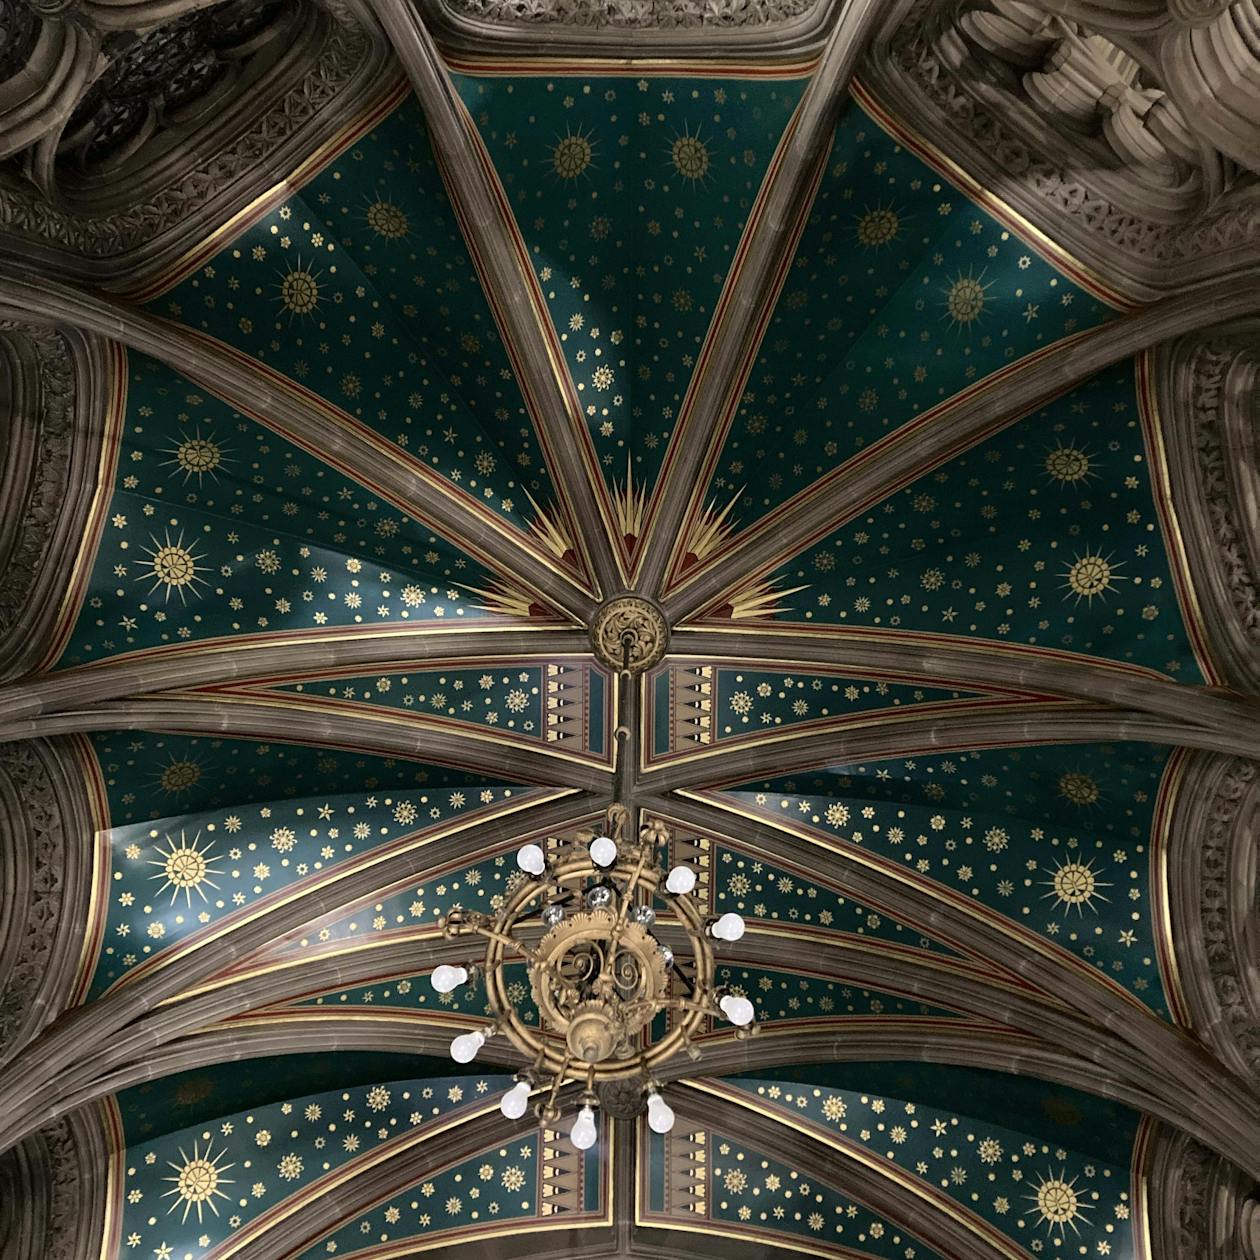 The ceiling of Manchester Town Hall, with detailed paintings and wooden beams.